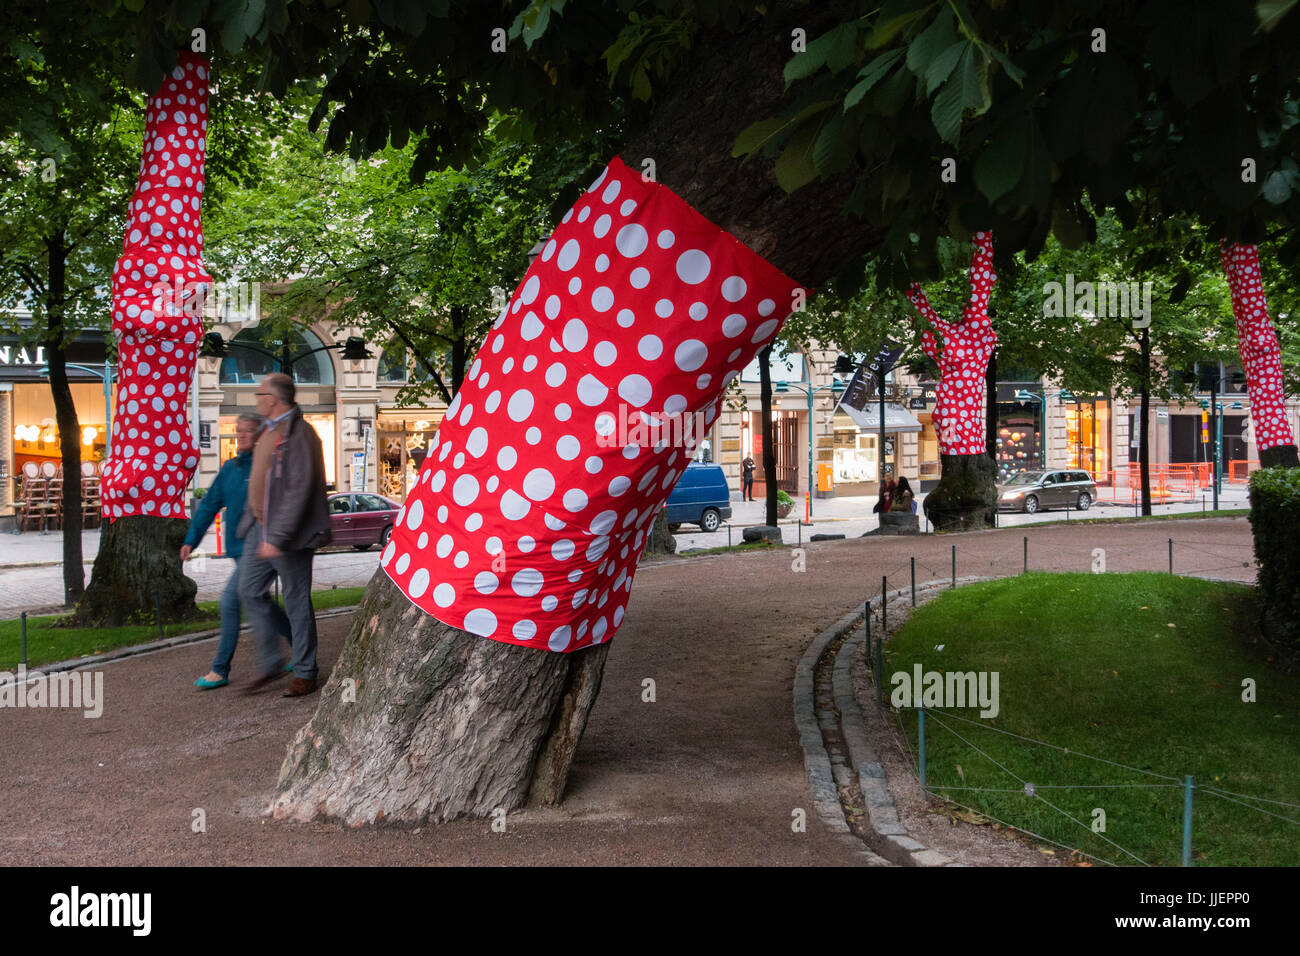 Decorative red tarps, with big white polka dots wrap the tree trunks in Esplanad Park in Helsinki, Finland city center. Stock Photo